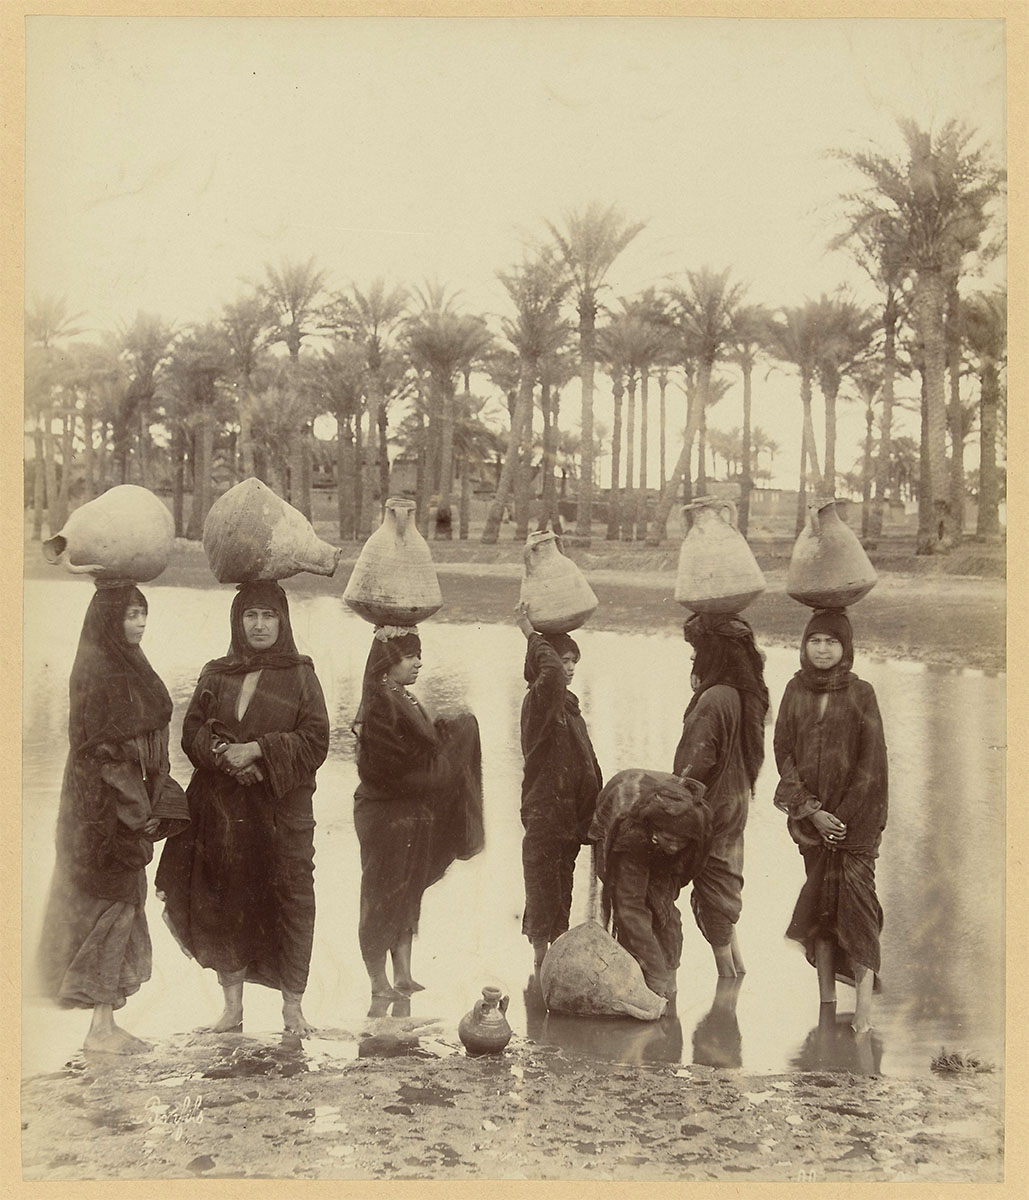 A group of women collect water from the Nile, ca. 1895 - ca. 1915 - Rijksmuseum<p>© Félix Bonfils</p>